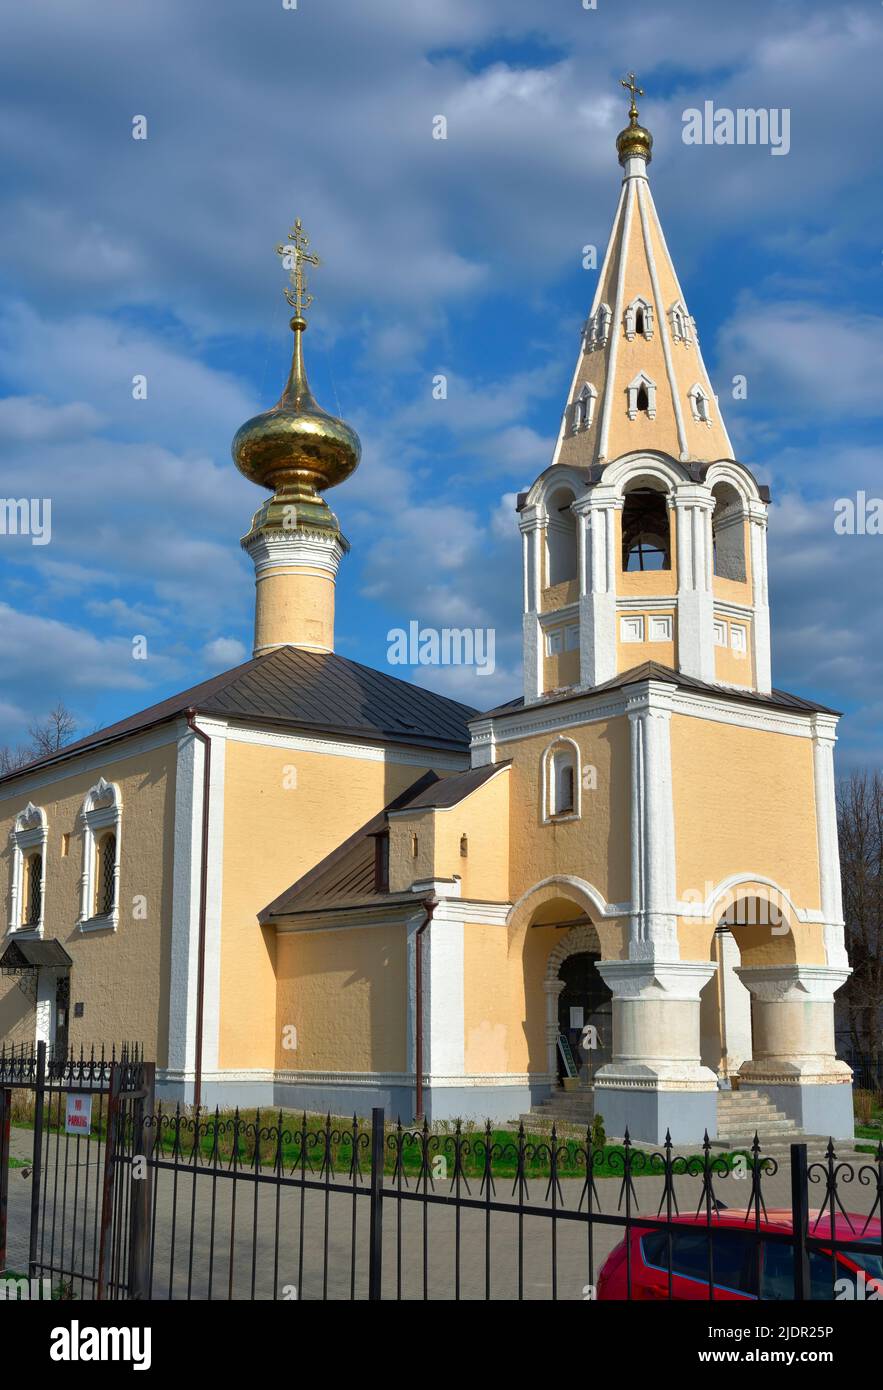 The Church of St. John the Baptist in Suzdal. Orthodox Church of Russian architecture of the XVIII century. Russia, 2022 Stock Photo